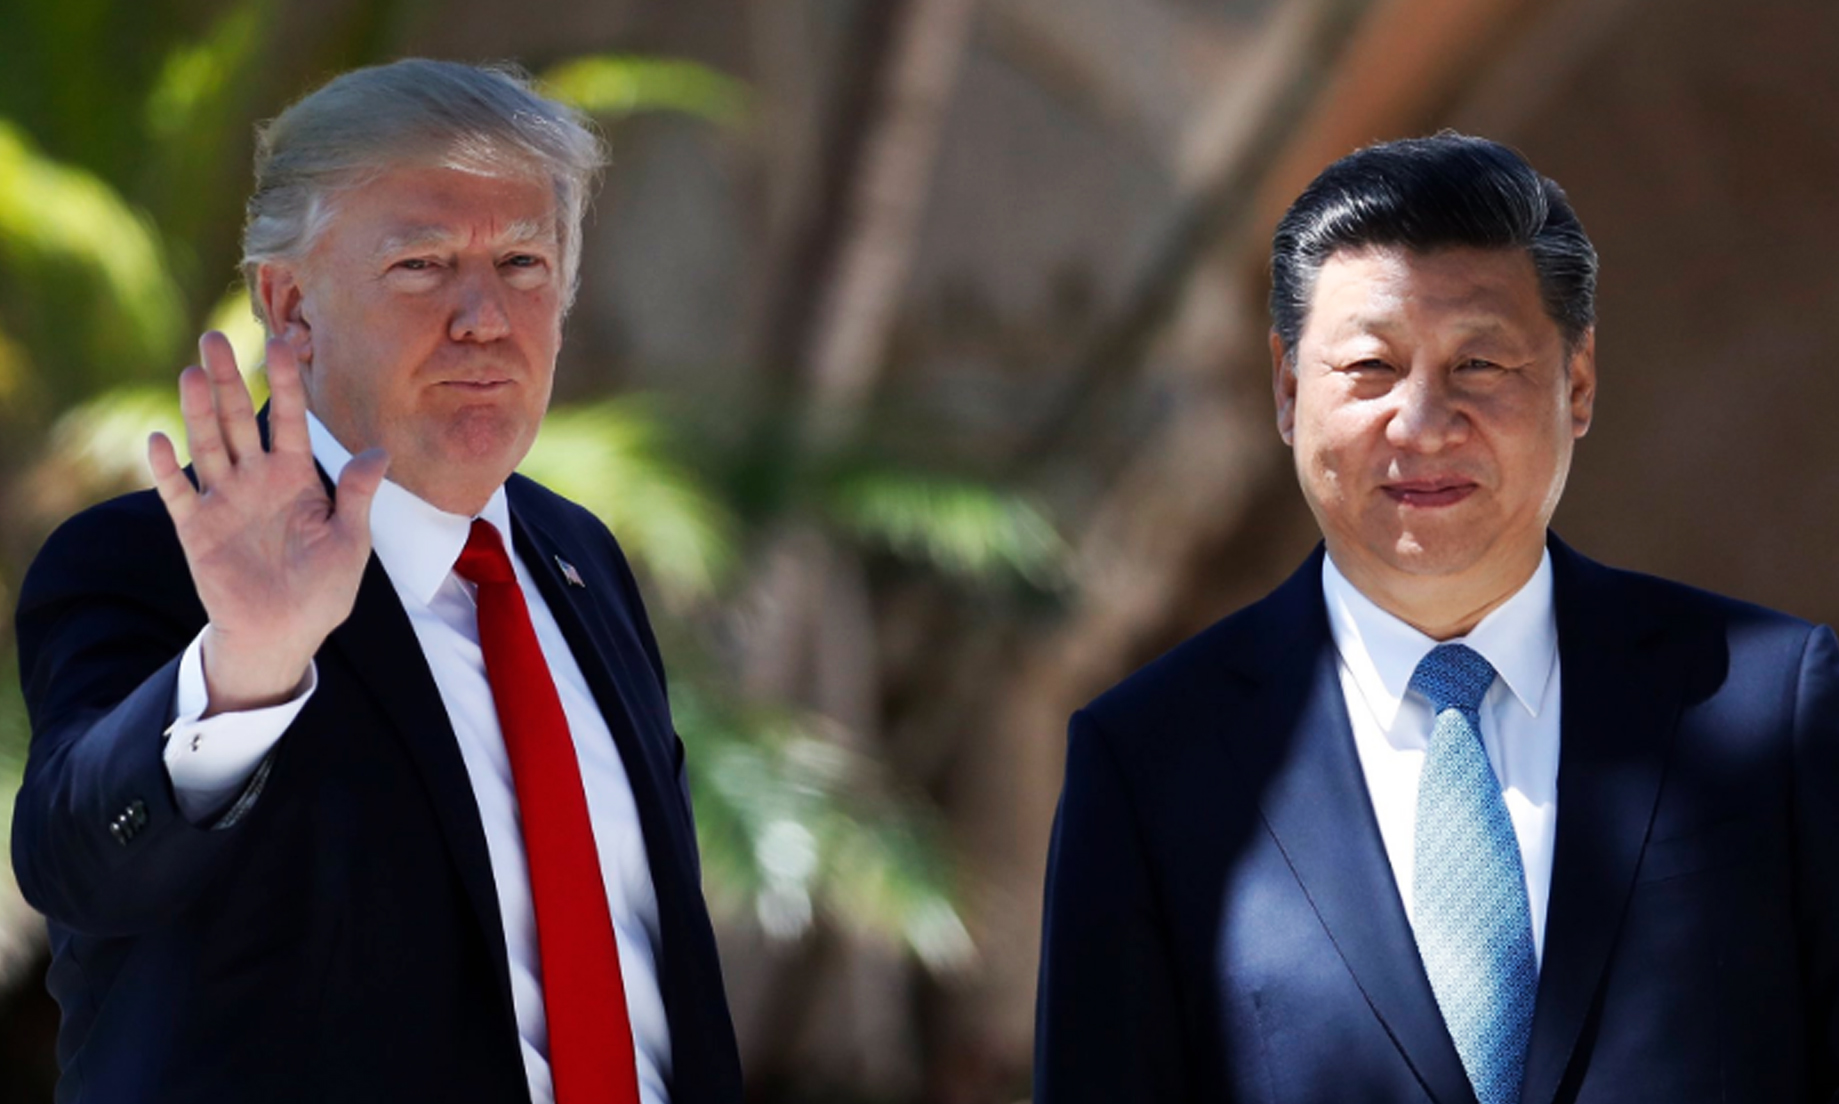 Update: US-China trade war deteriorates, as Trump lashes out at Beijing